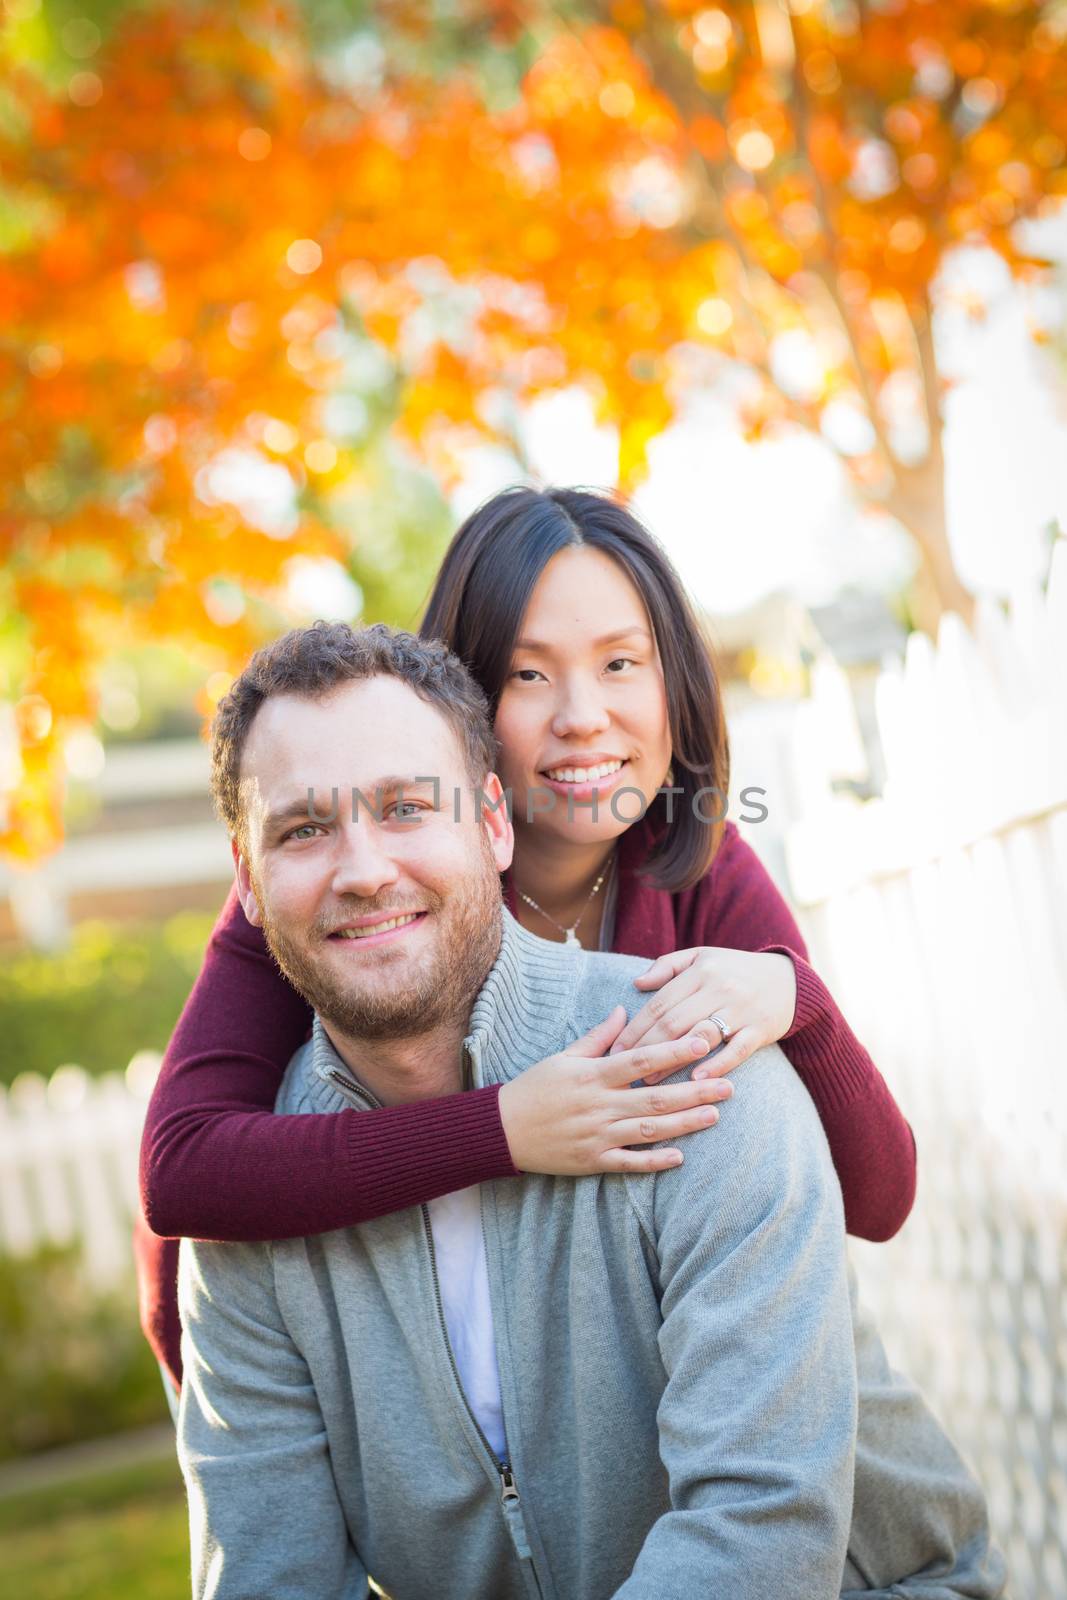 Outdoor Fall Portrait of Chinese and Caucasian Young Adult Couple.